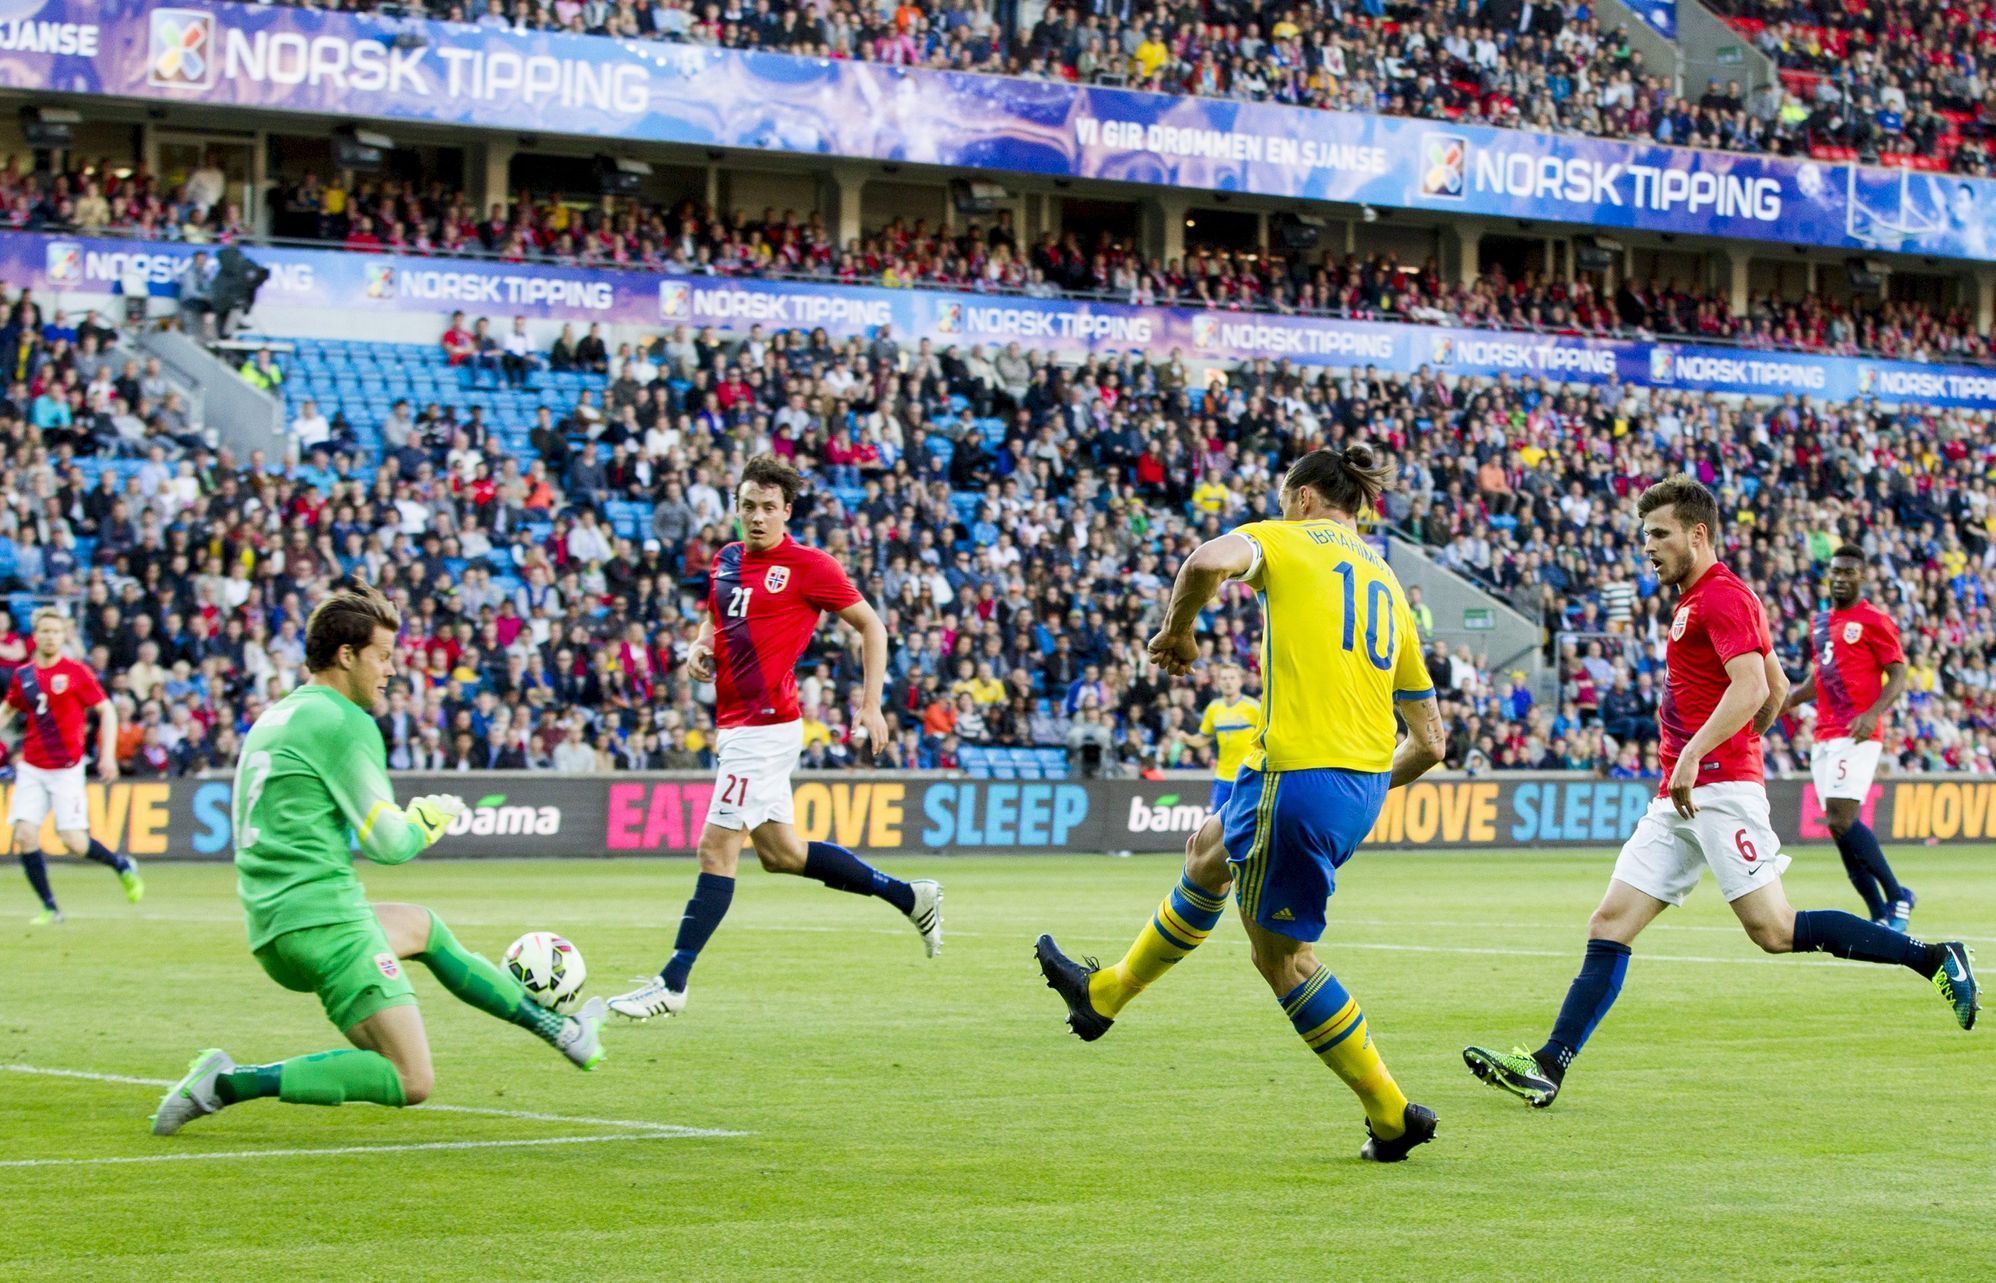 Norway's goalkeeper Nyland saves a shot by Sweden's captain Ibrahimovic during an international friendly soccer match between Norway and Sweden at Ullevaal Stadium in Oslo